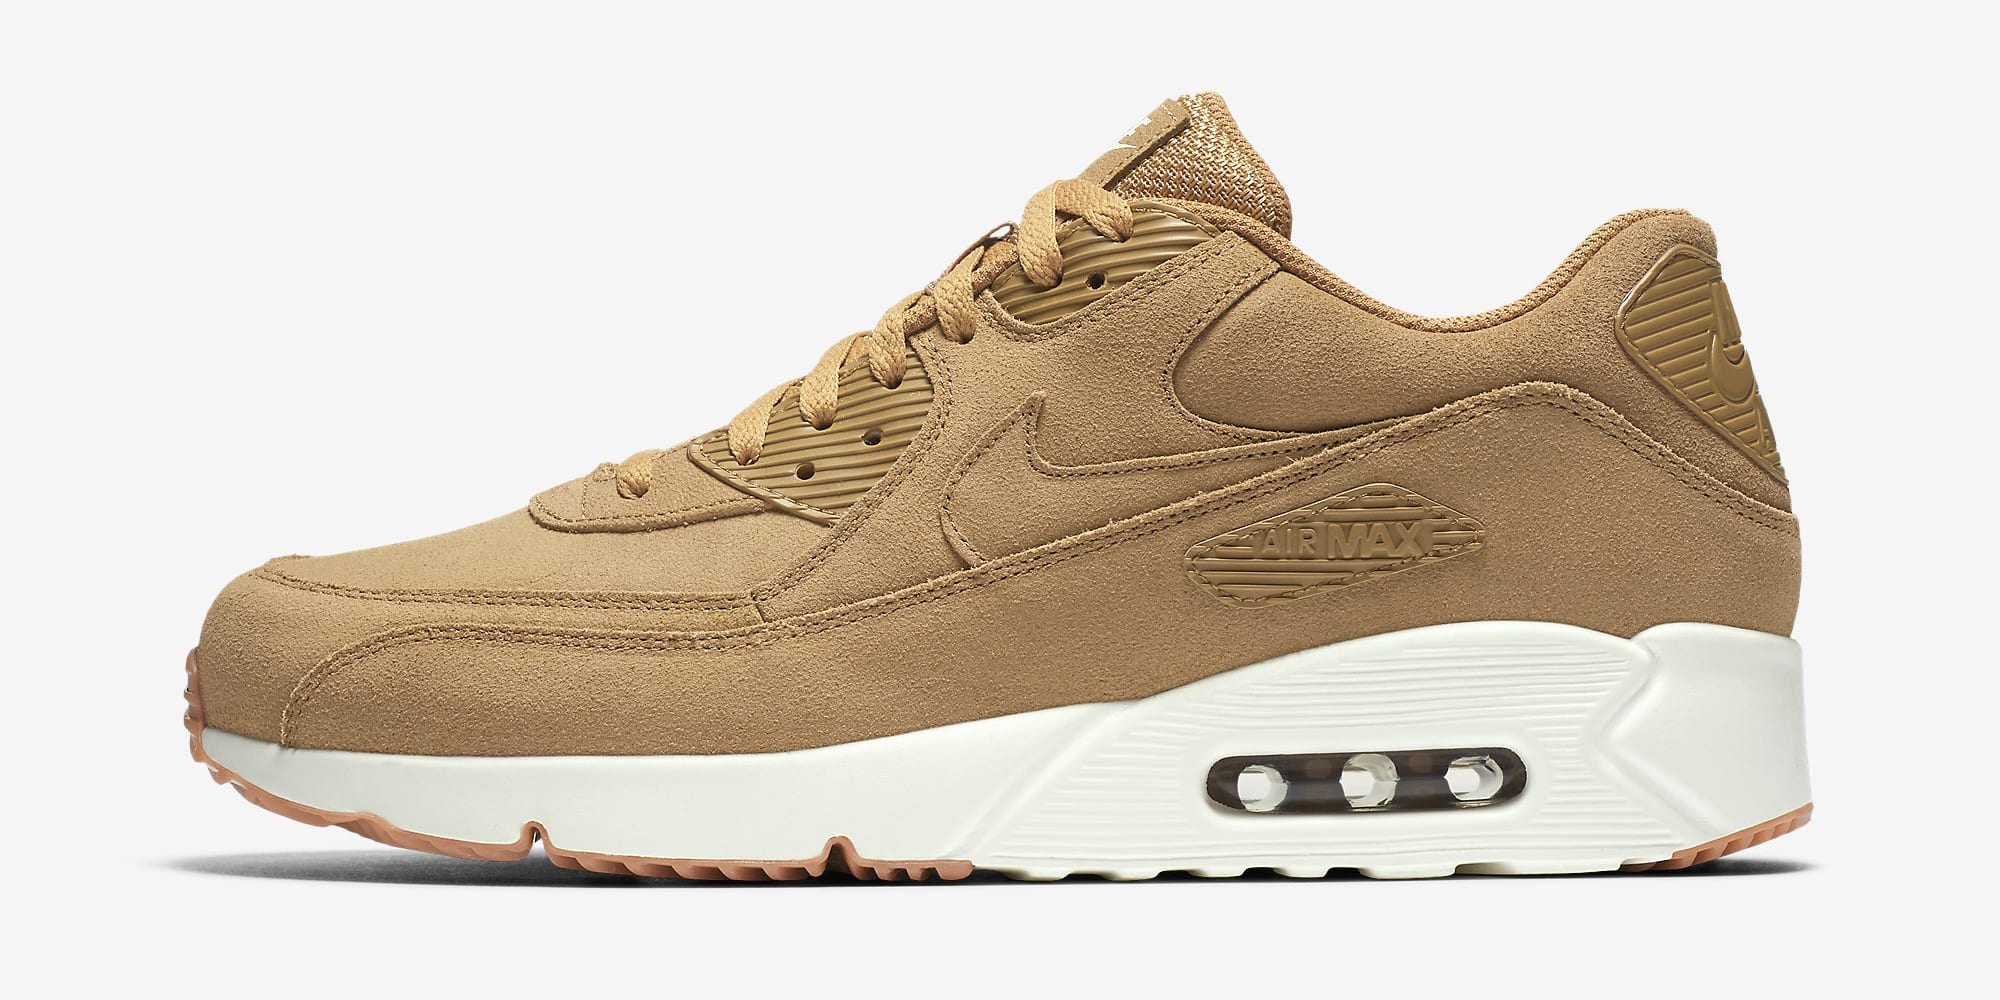 Nike Wheat Sneakers | Sole Collector